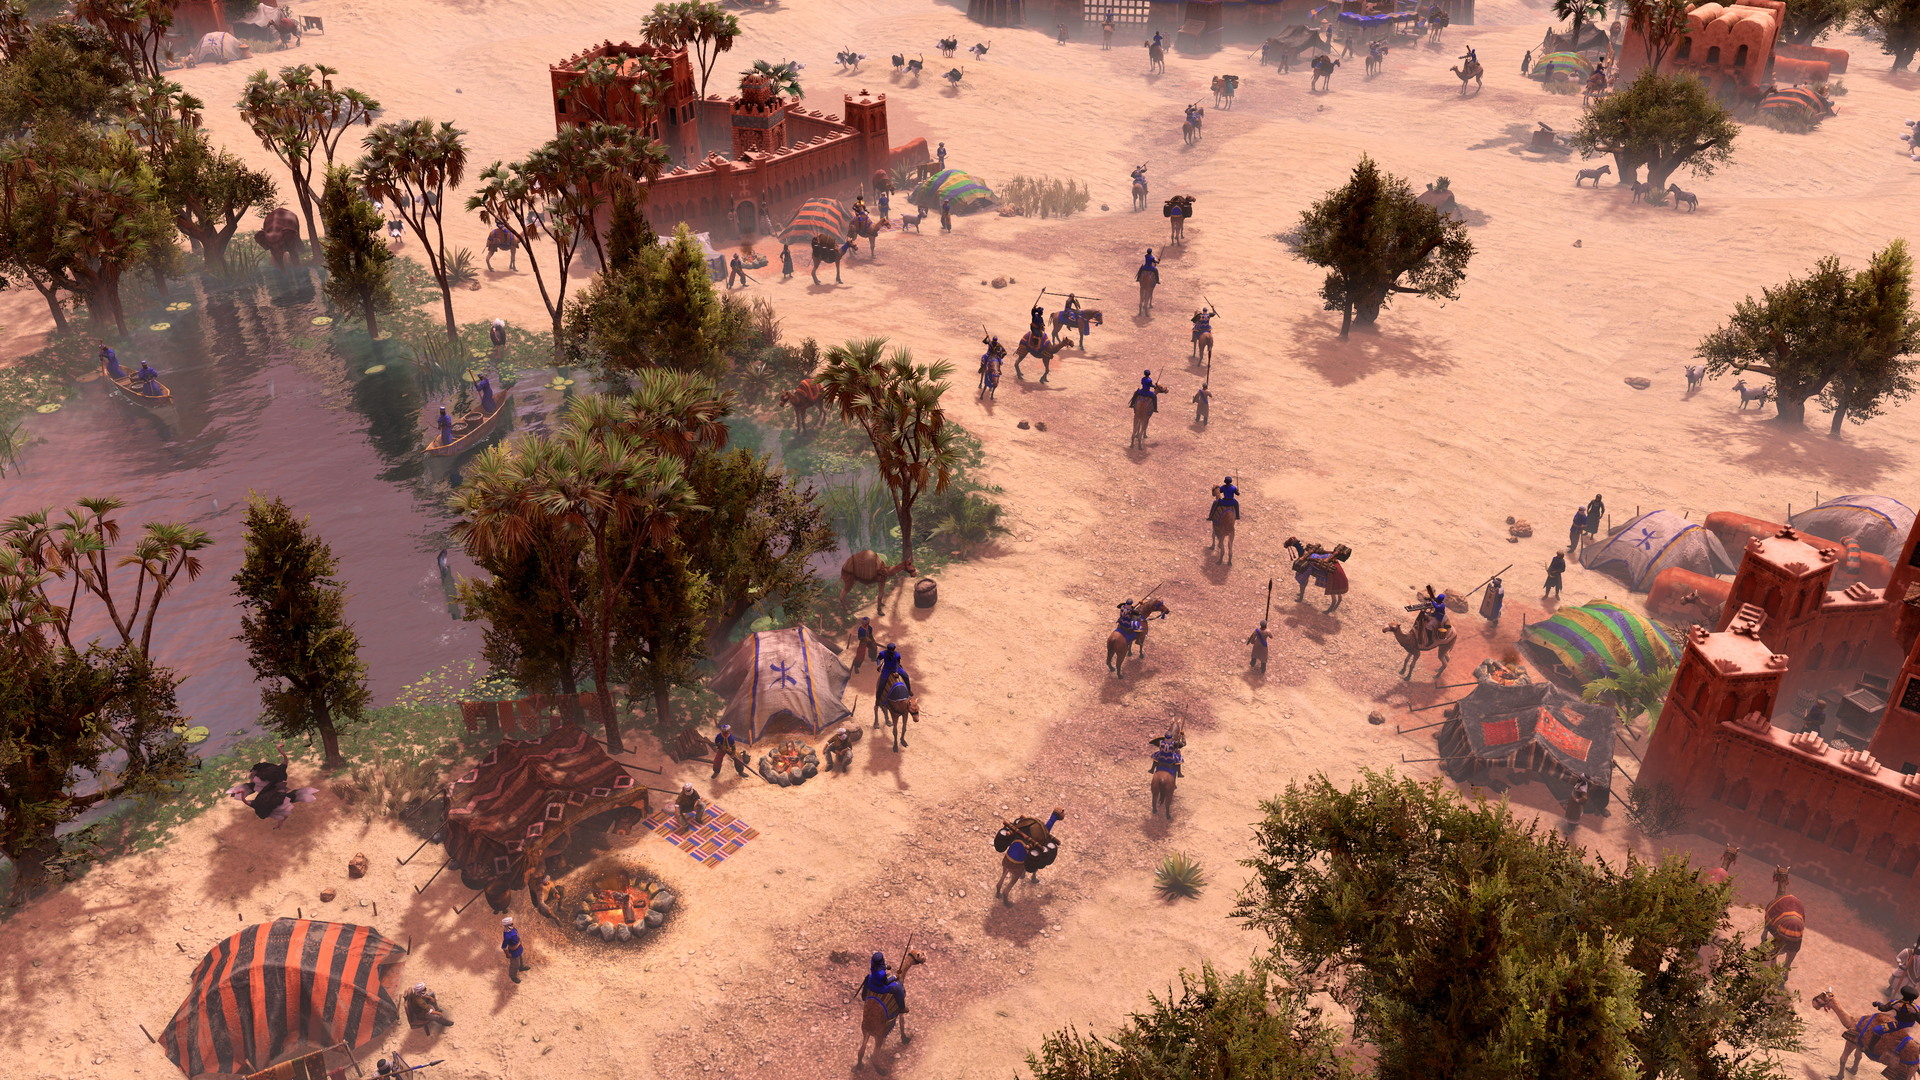 Age of Empires III: Definitive Edition - The African Royals - screenshot 6